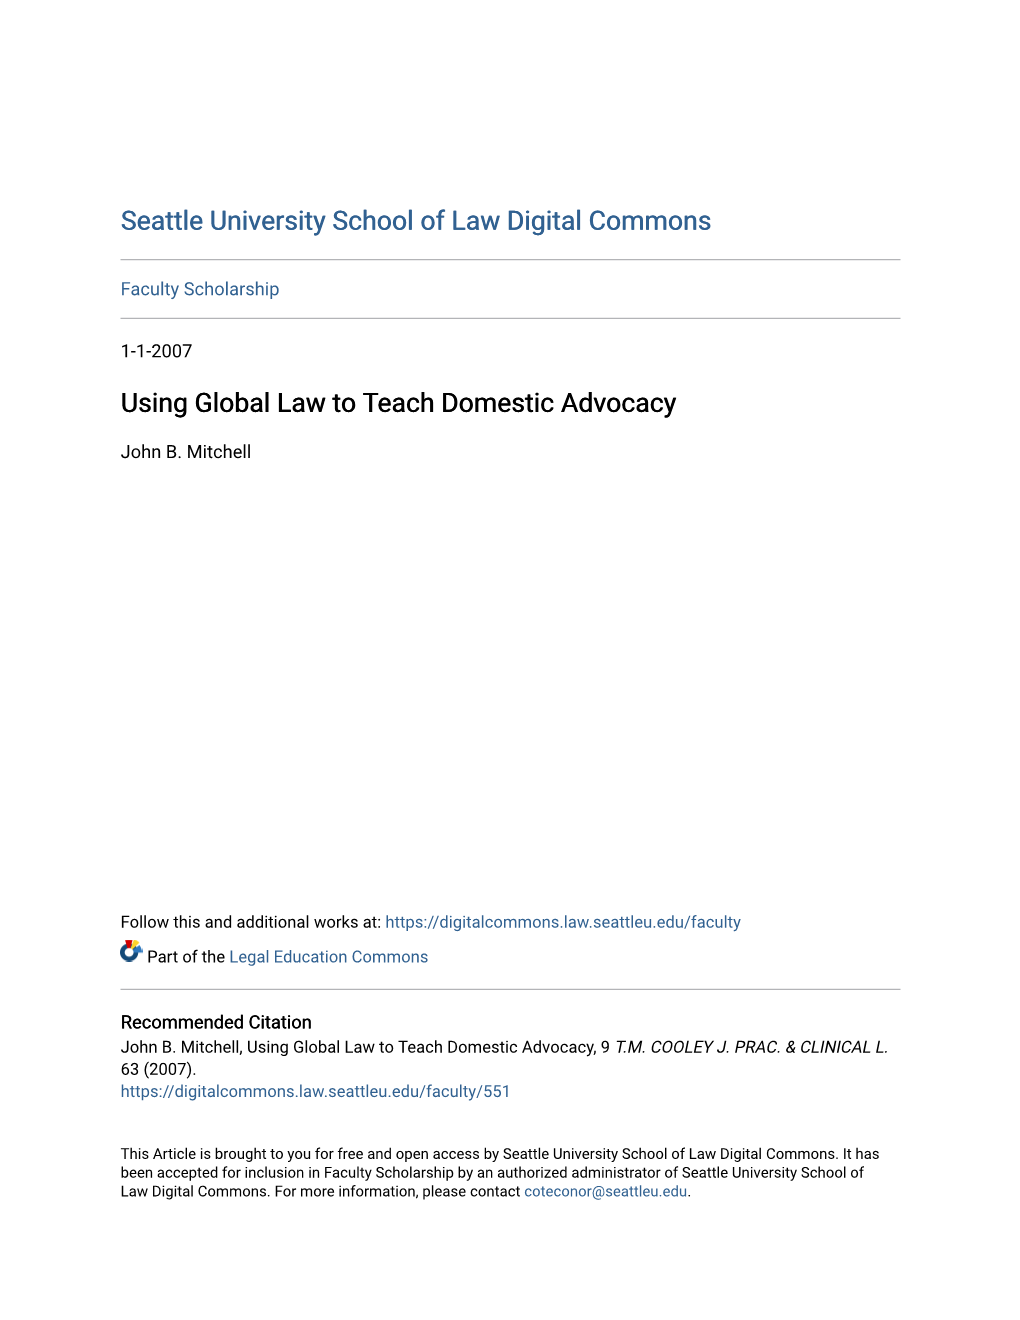 Using Global Law to Teach Domestic Advocacy